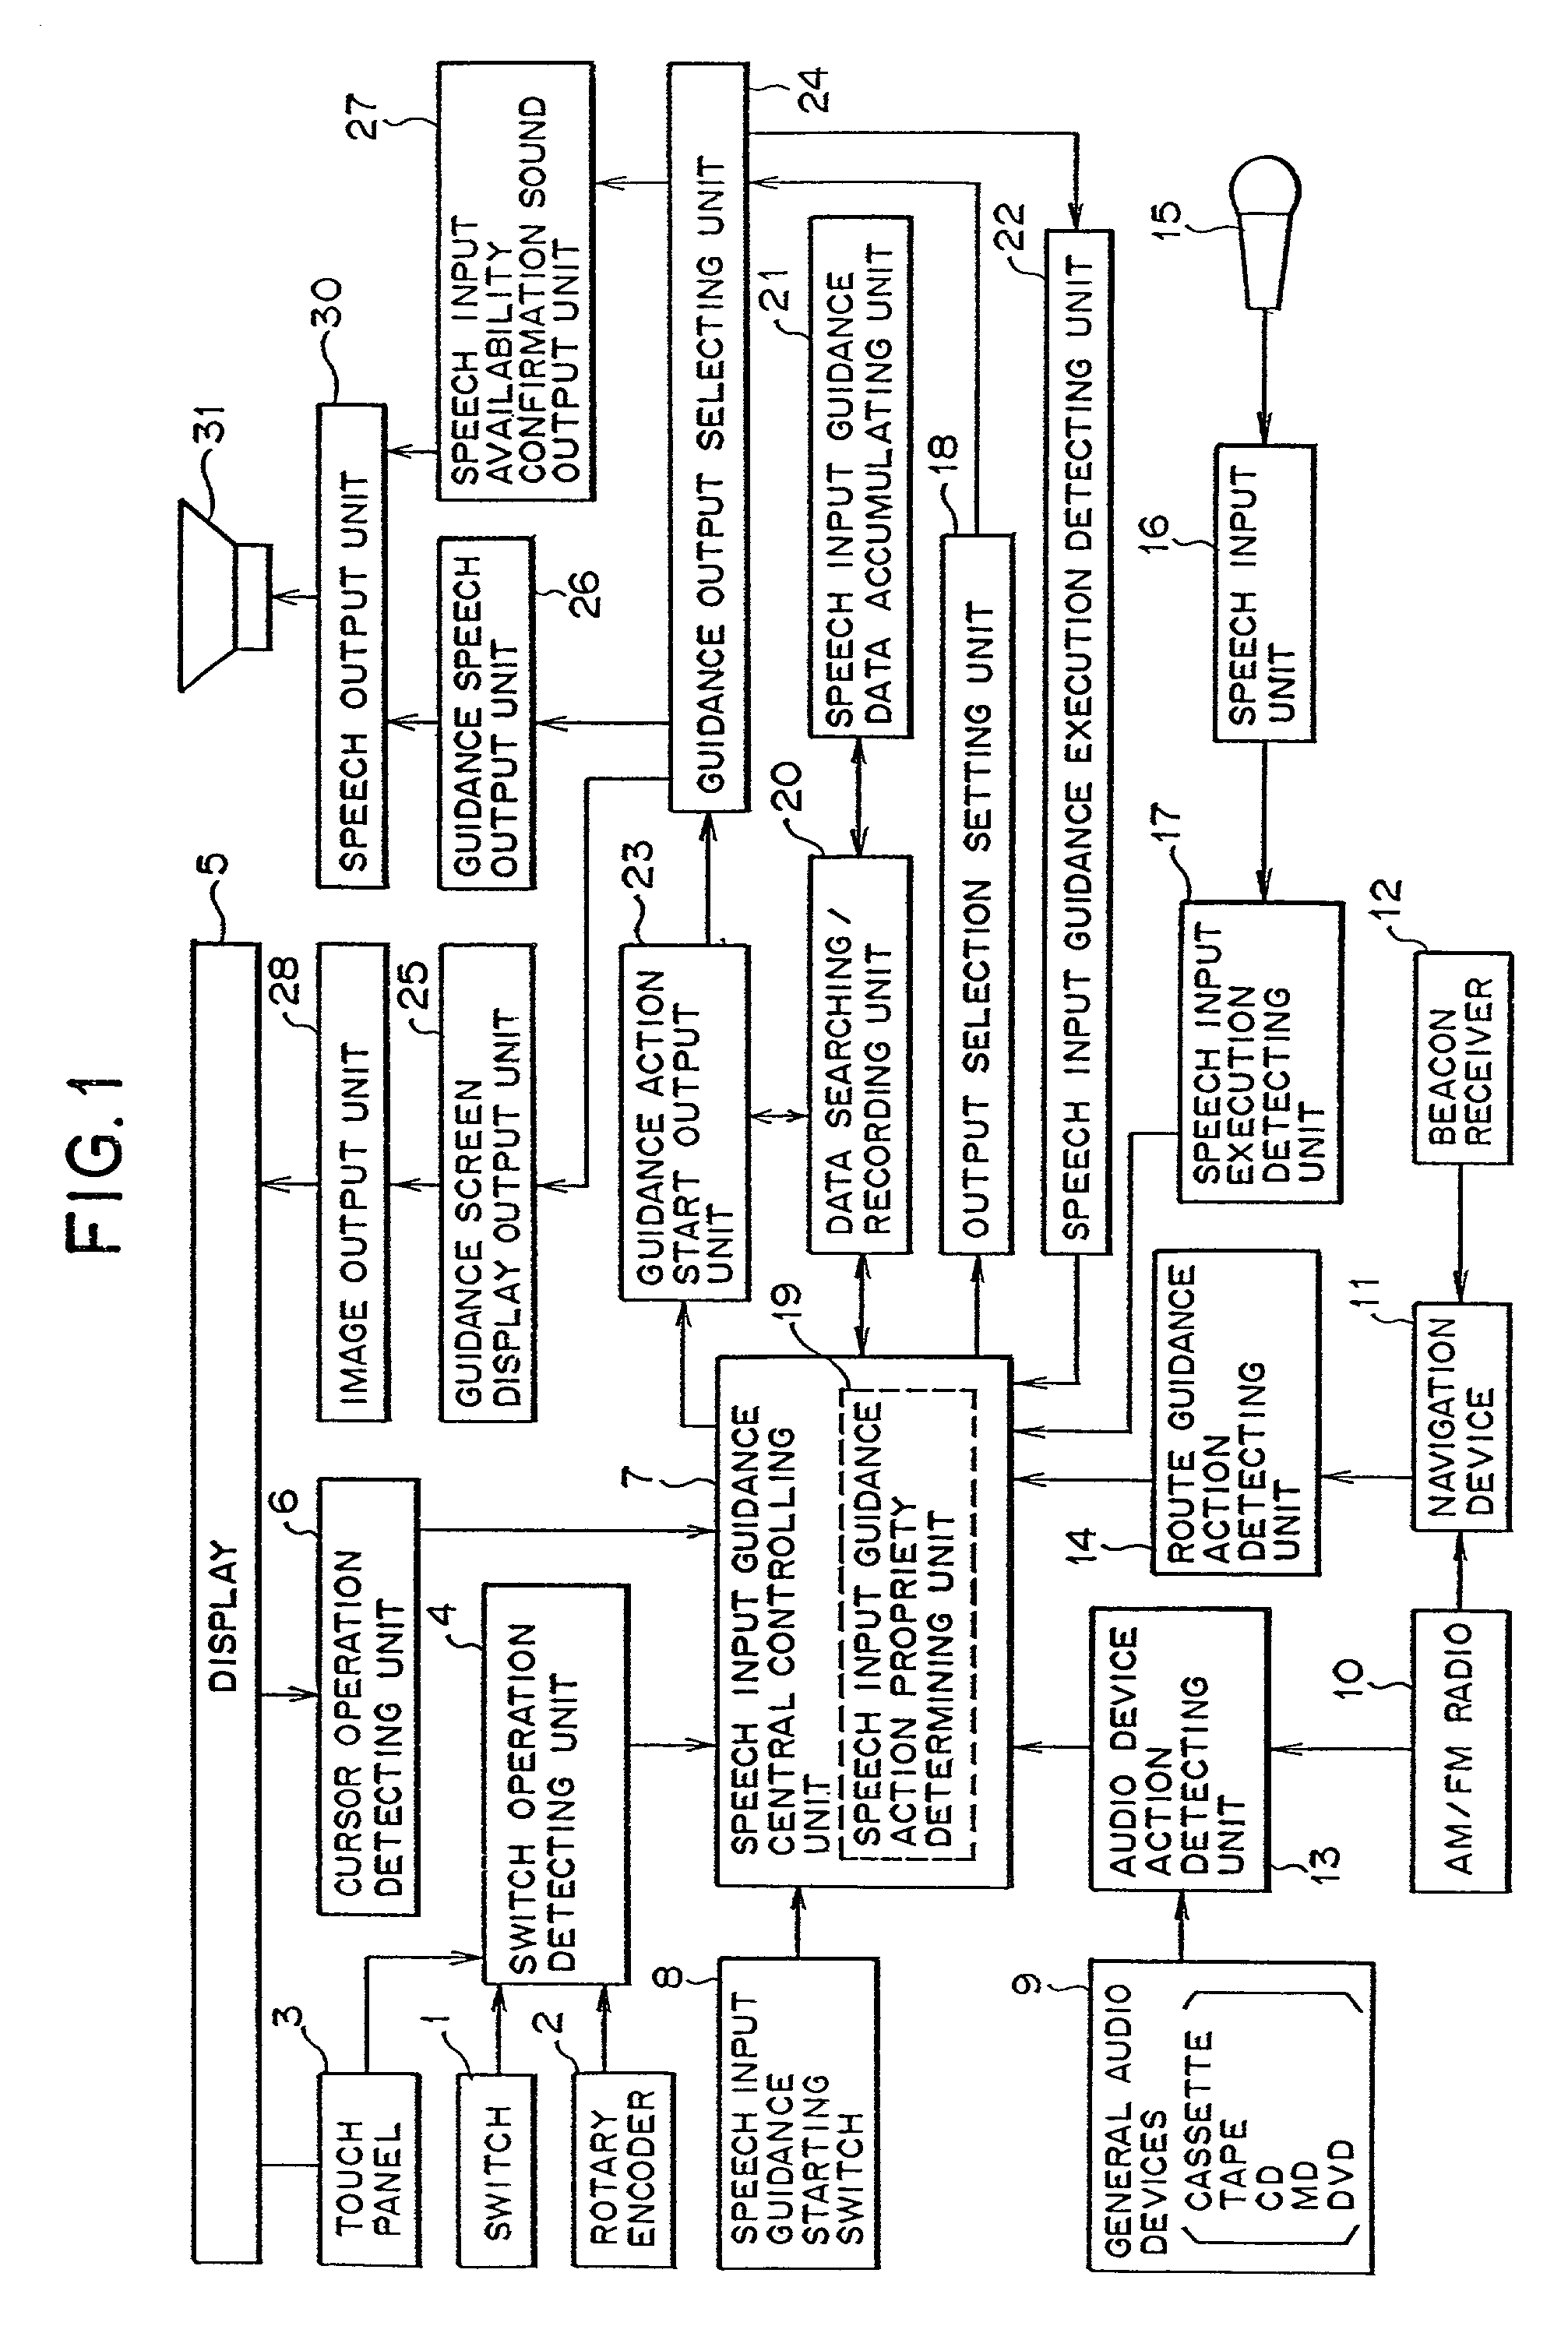 Method and apparatus for speech input guidance